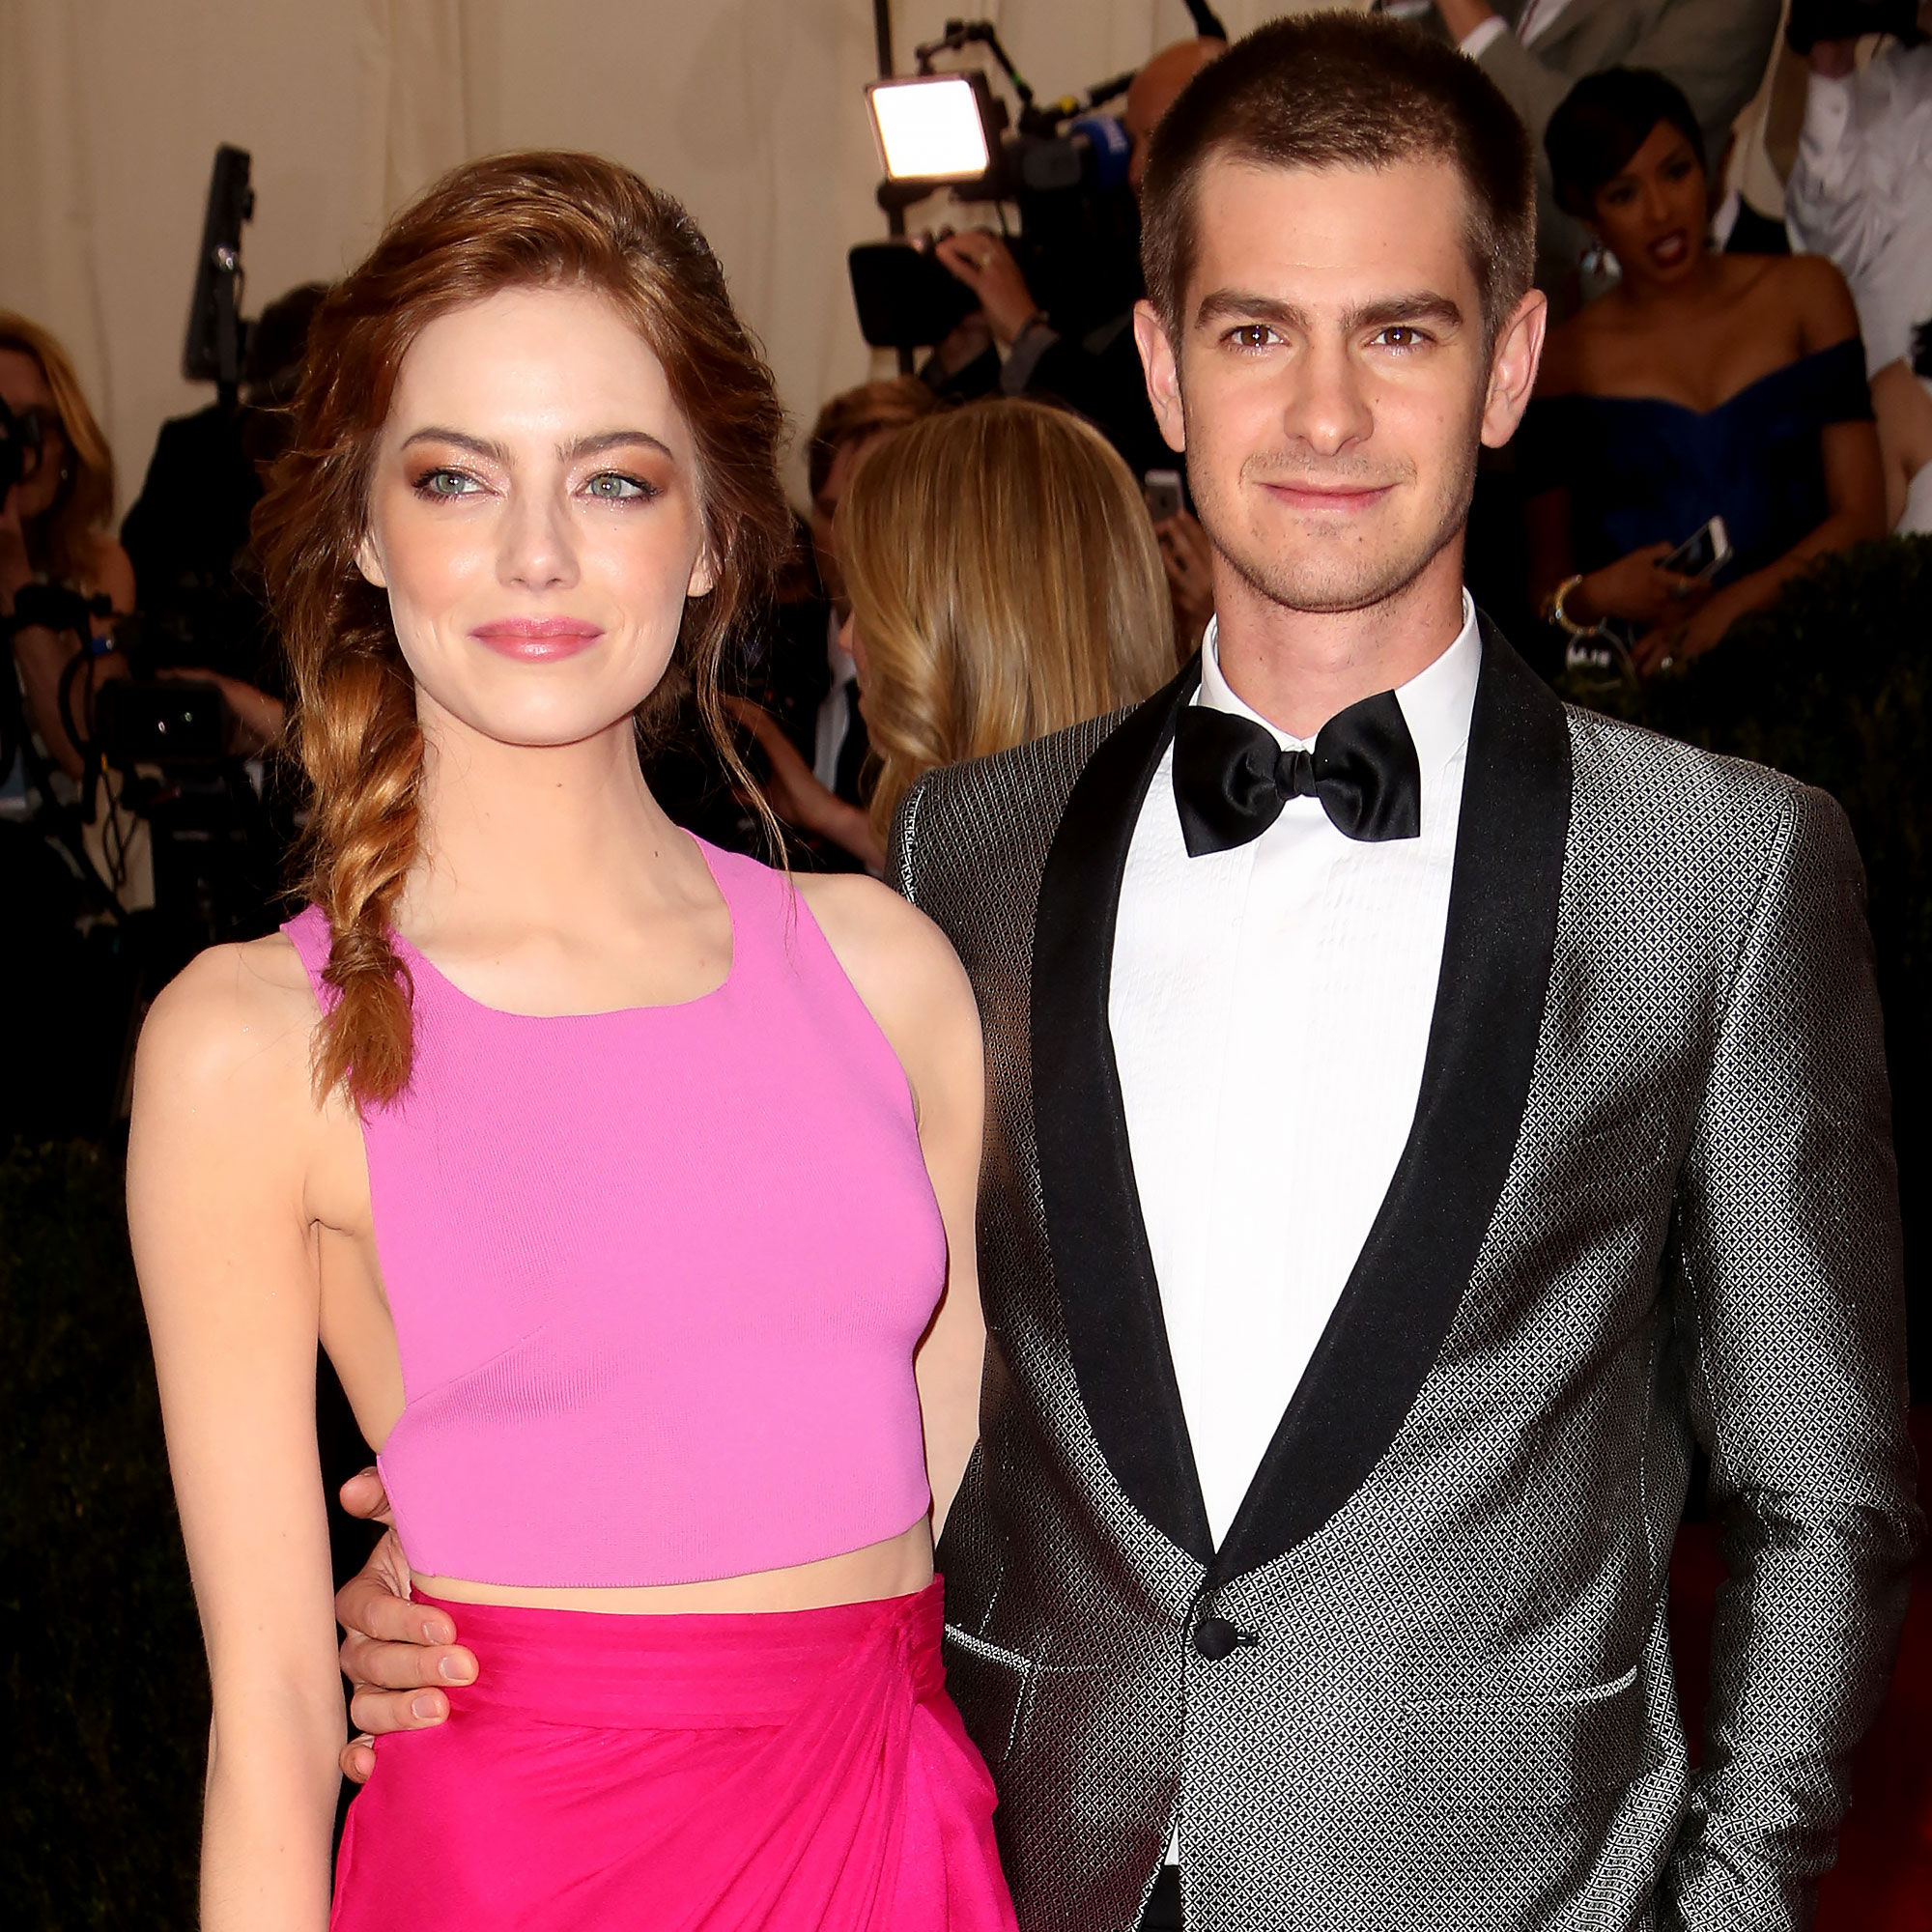 Andrew Garfield Is Now Single Following Reports of a Breakup With